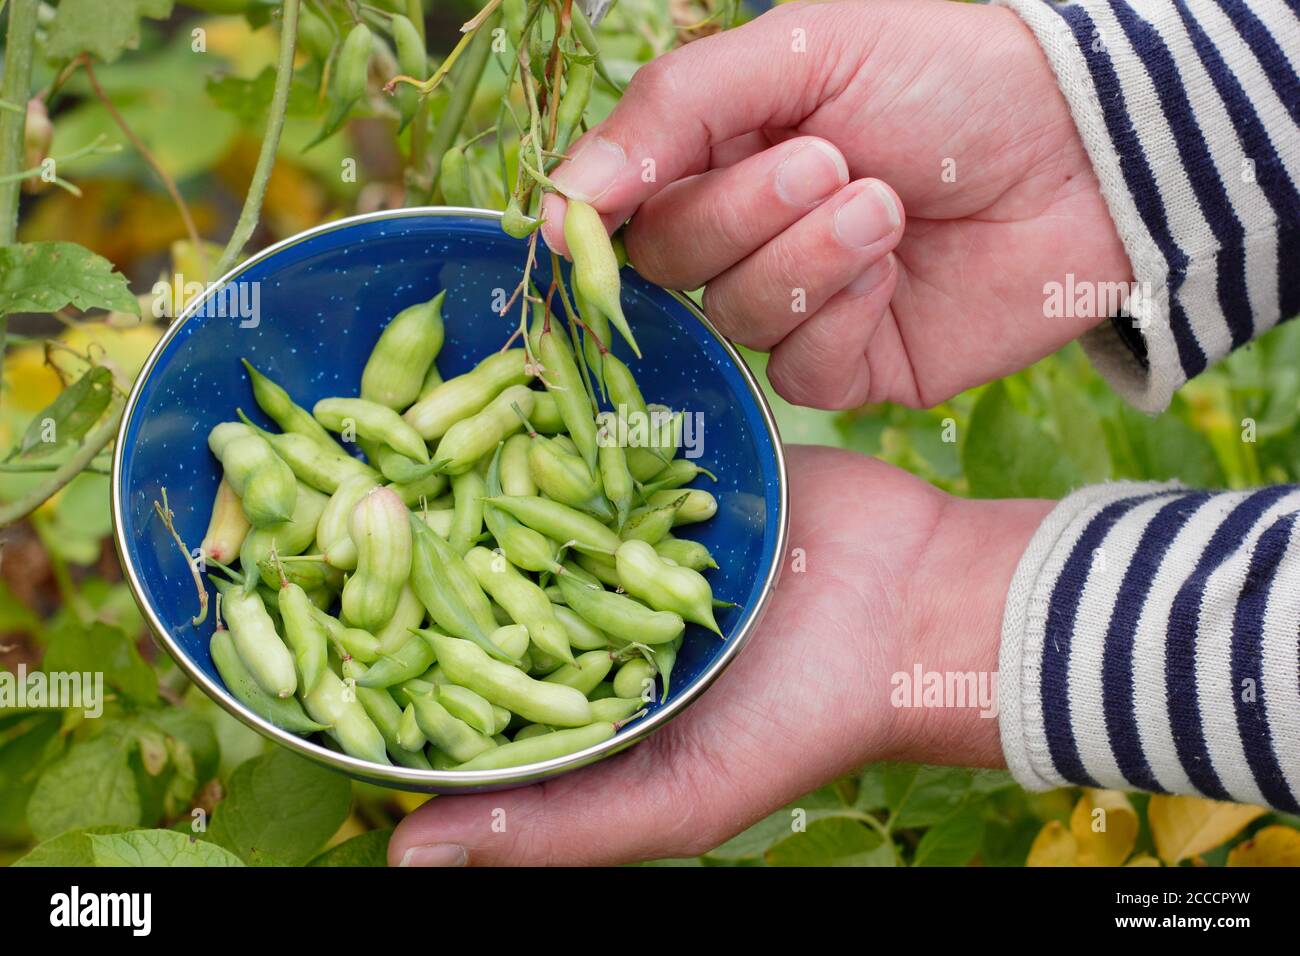 Raphanus sativus. Man picking radish seed pods consequent to letting the plant go to seed. UK Stock Photo